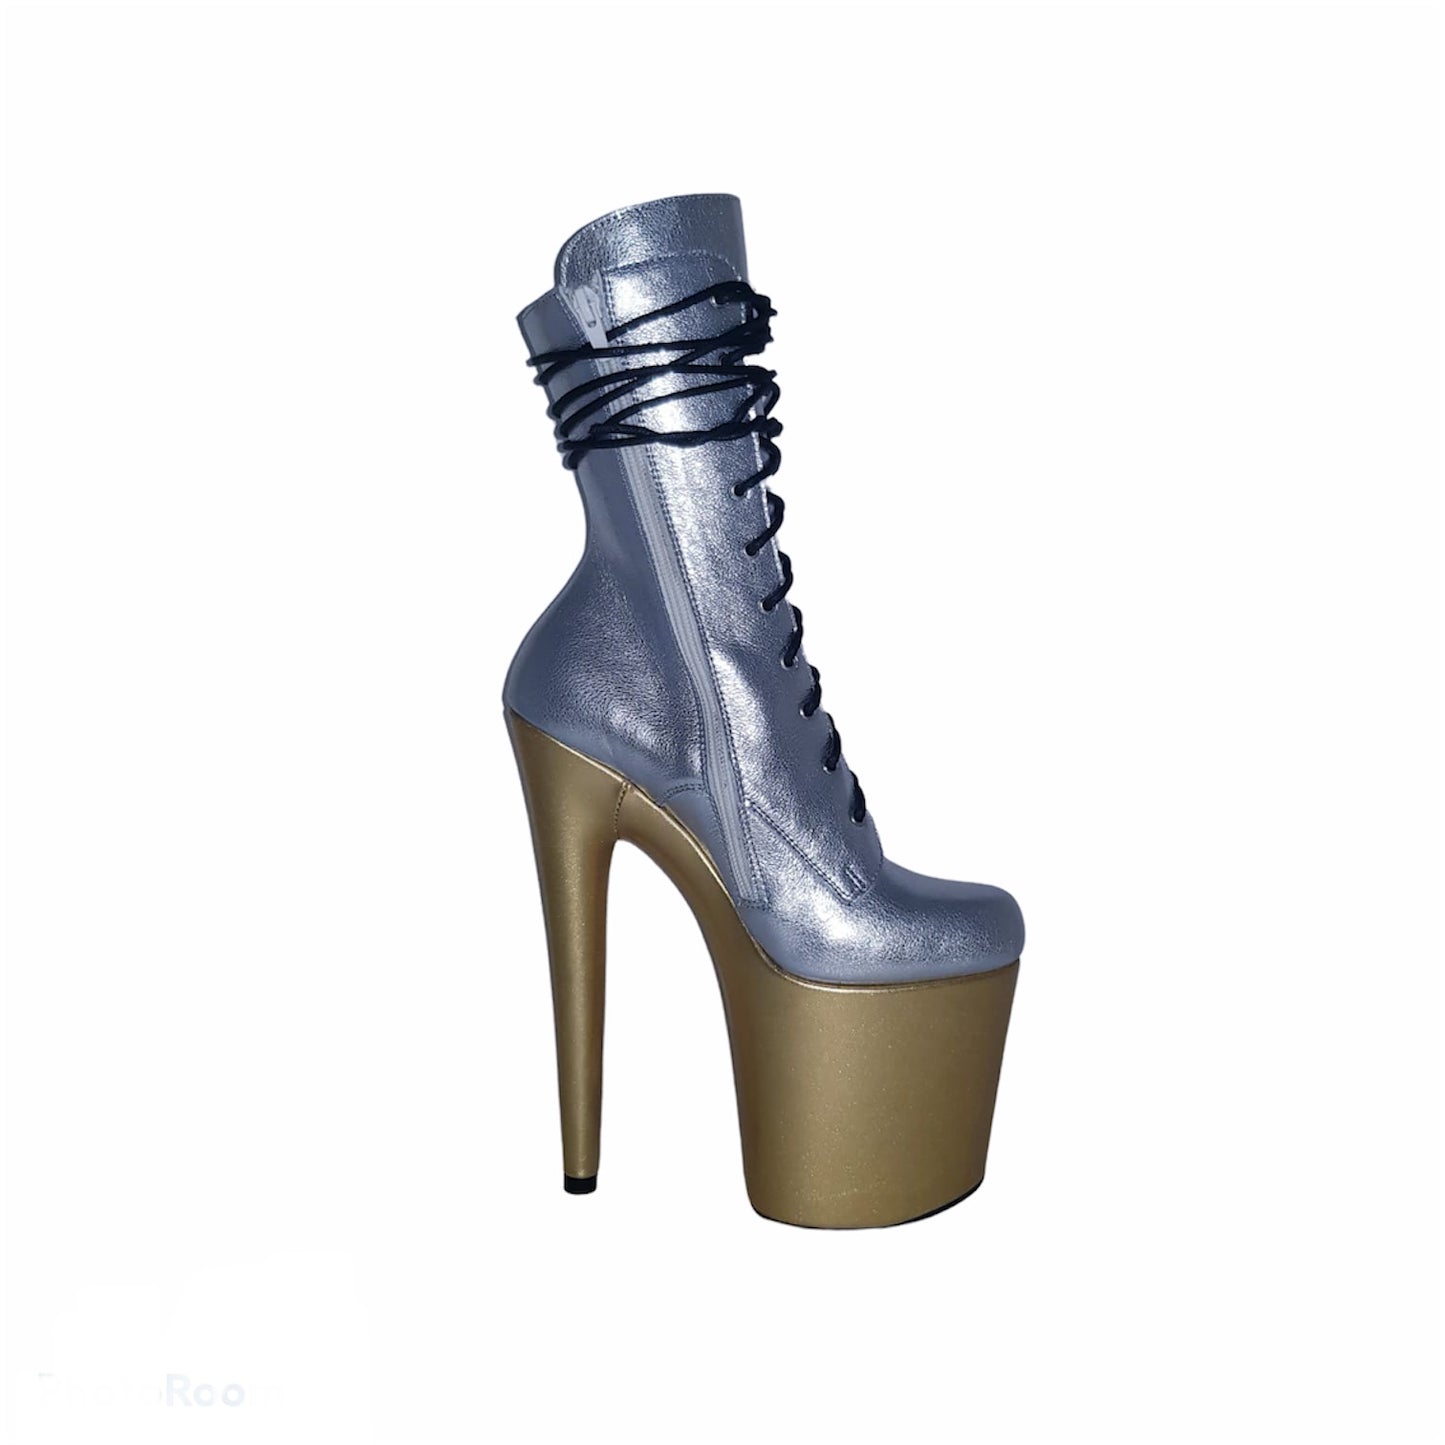 Silver and gold genuine leather ankle - mid calf boots